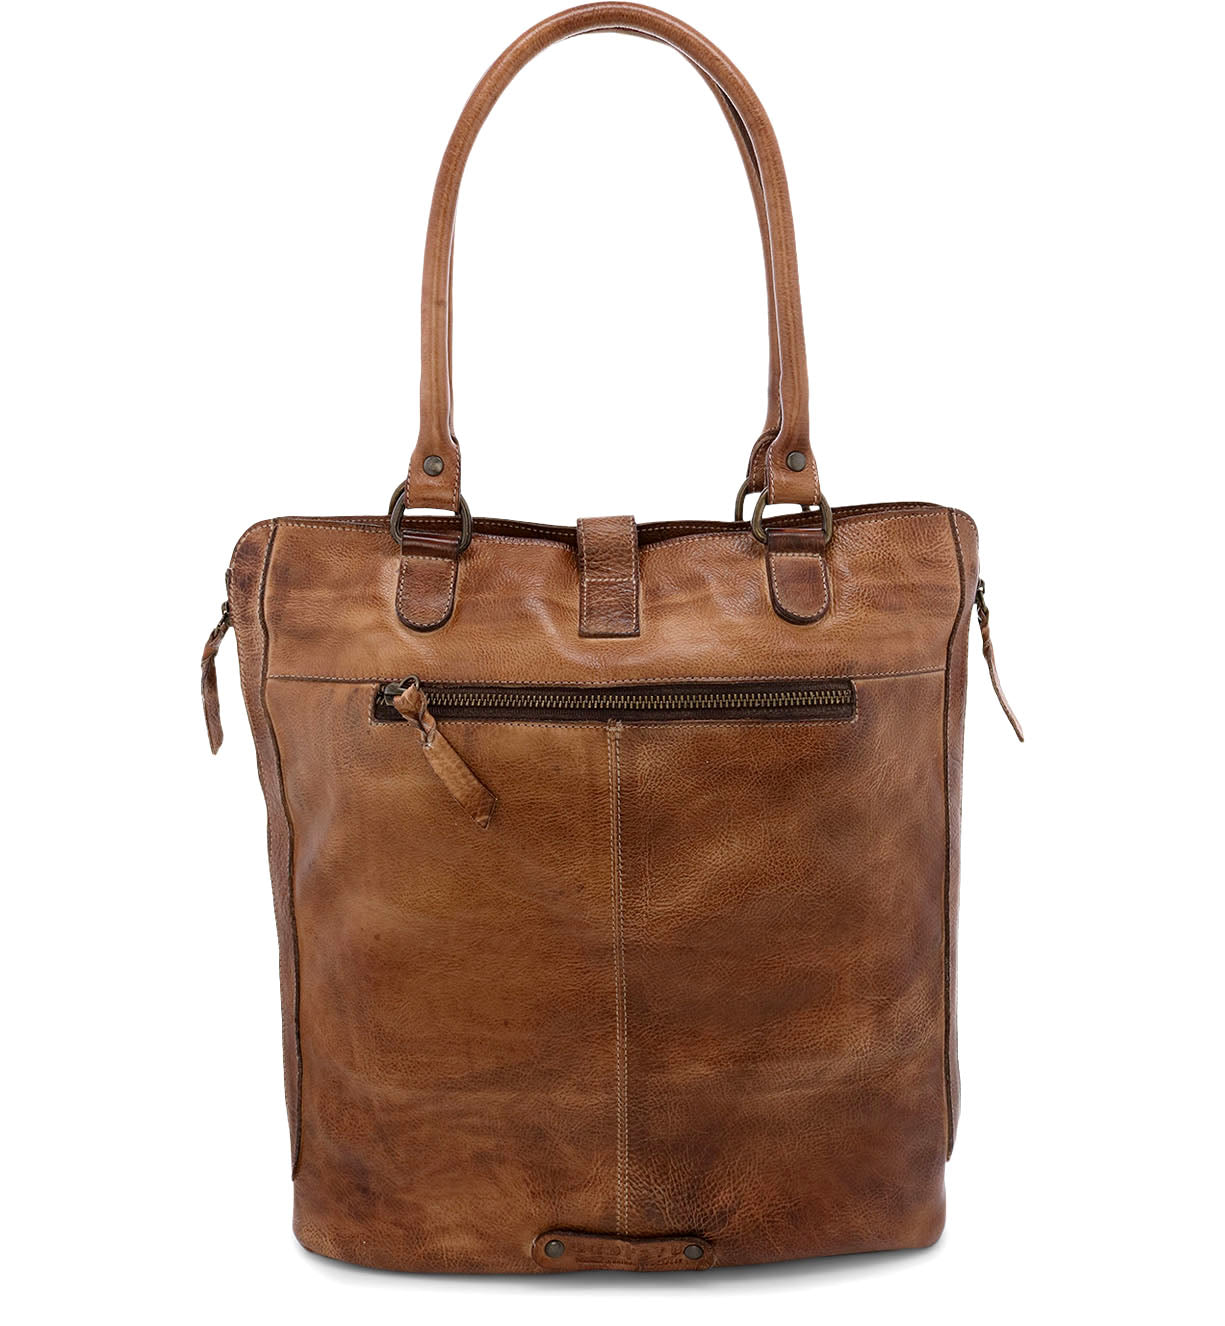 The Mildred by Bed Stu women's brown leather tote bag.